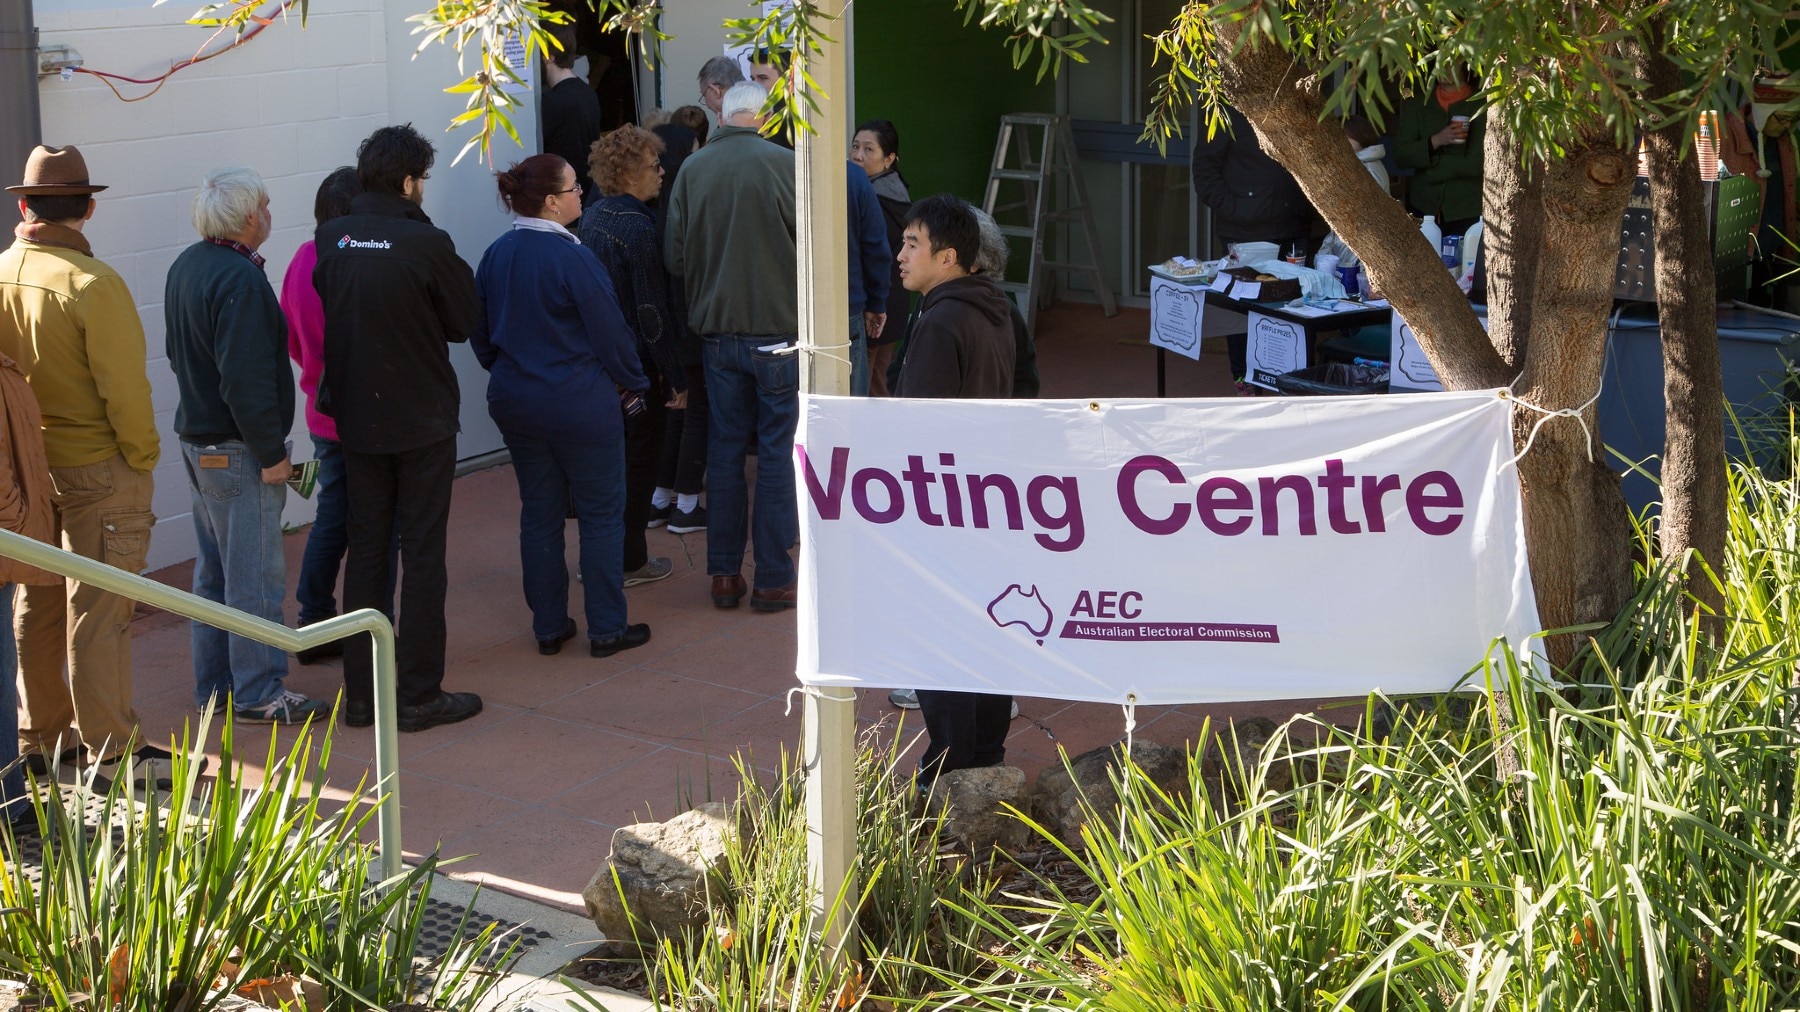 Voters lining up to vote at the Voting Centre.